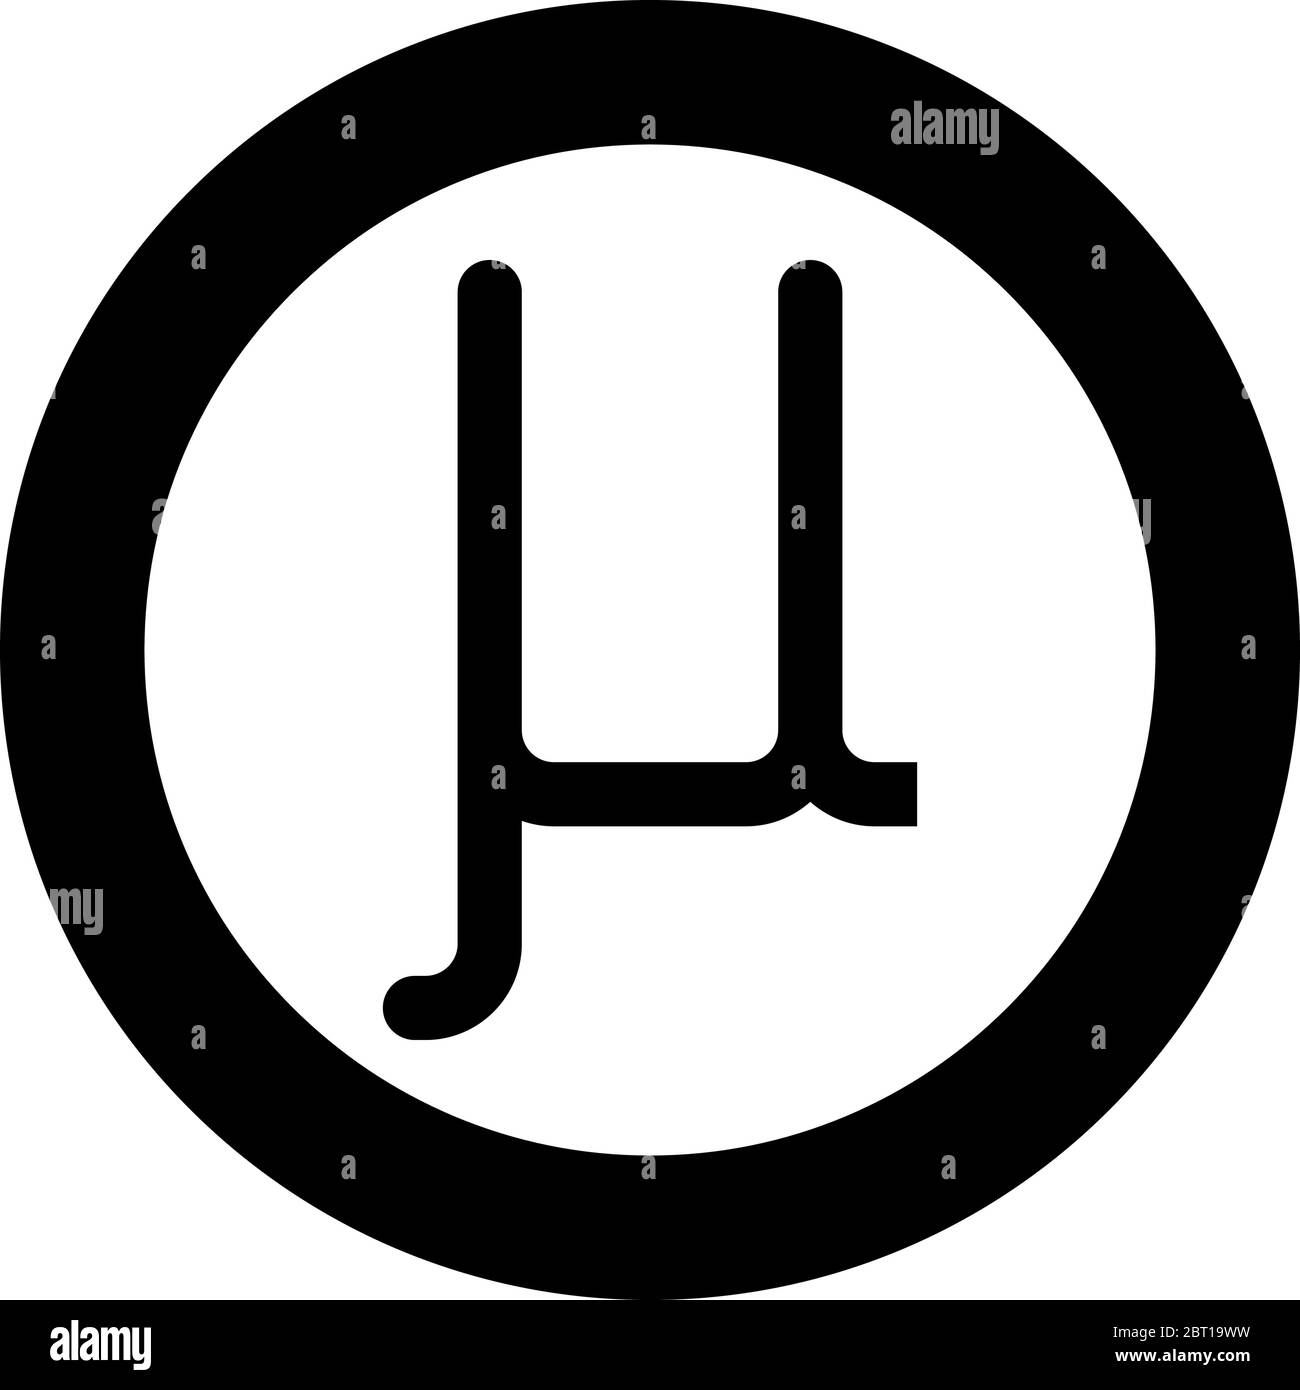 Mu greek symbol small letter lowercase font icon in circle round black color vector illustration flat style simple image Stock Vector